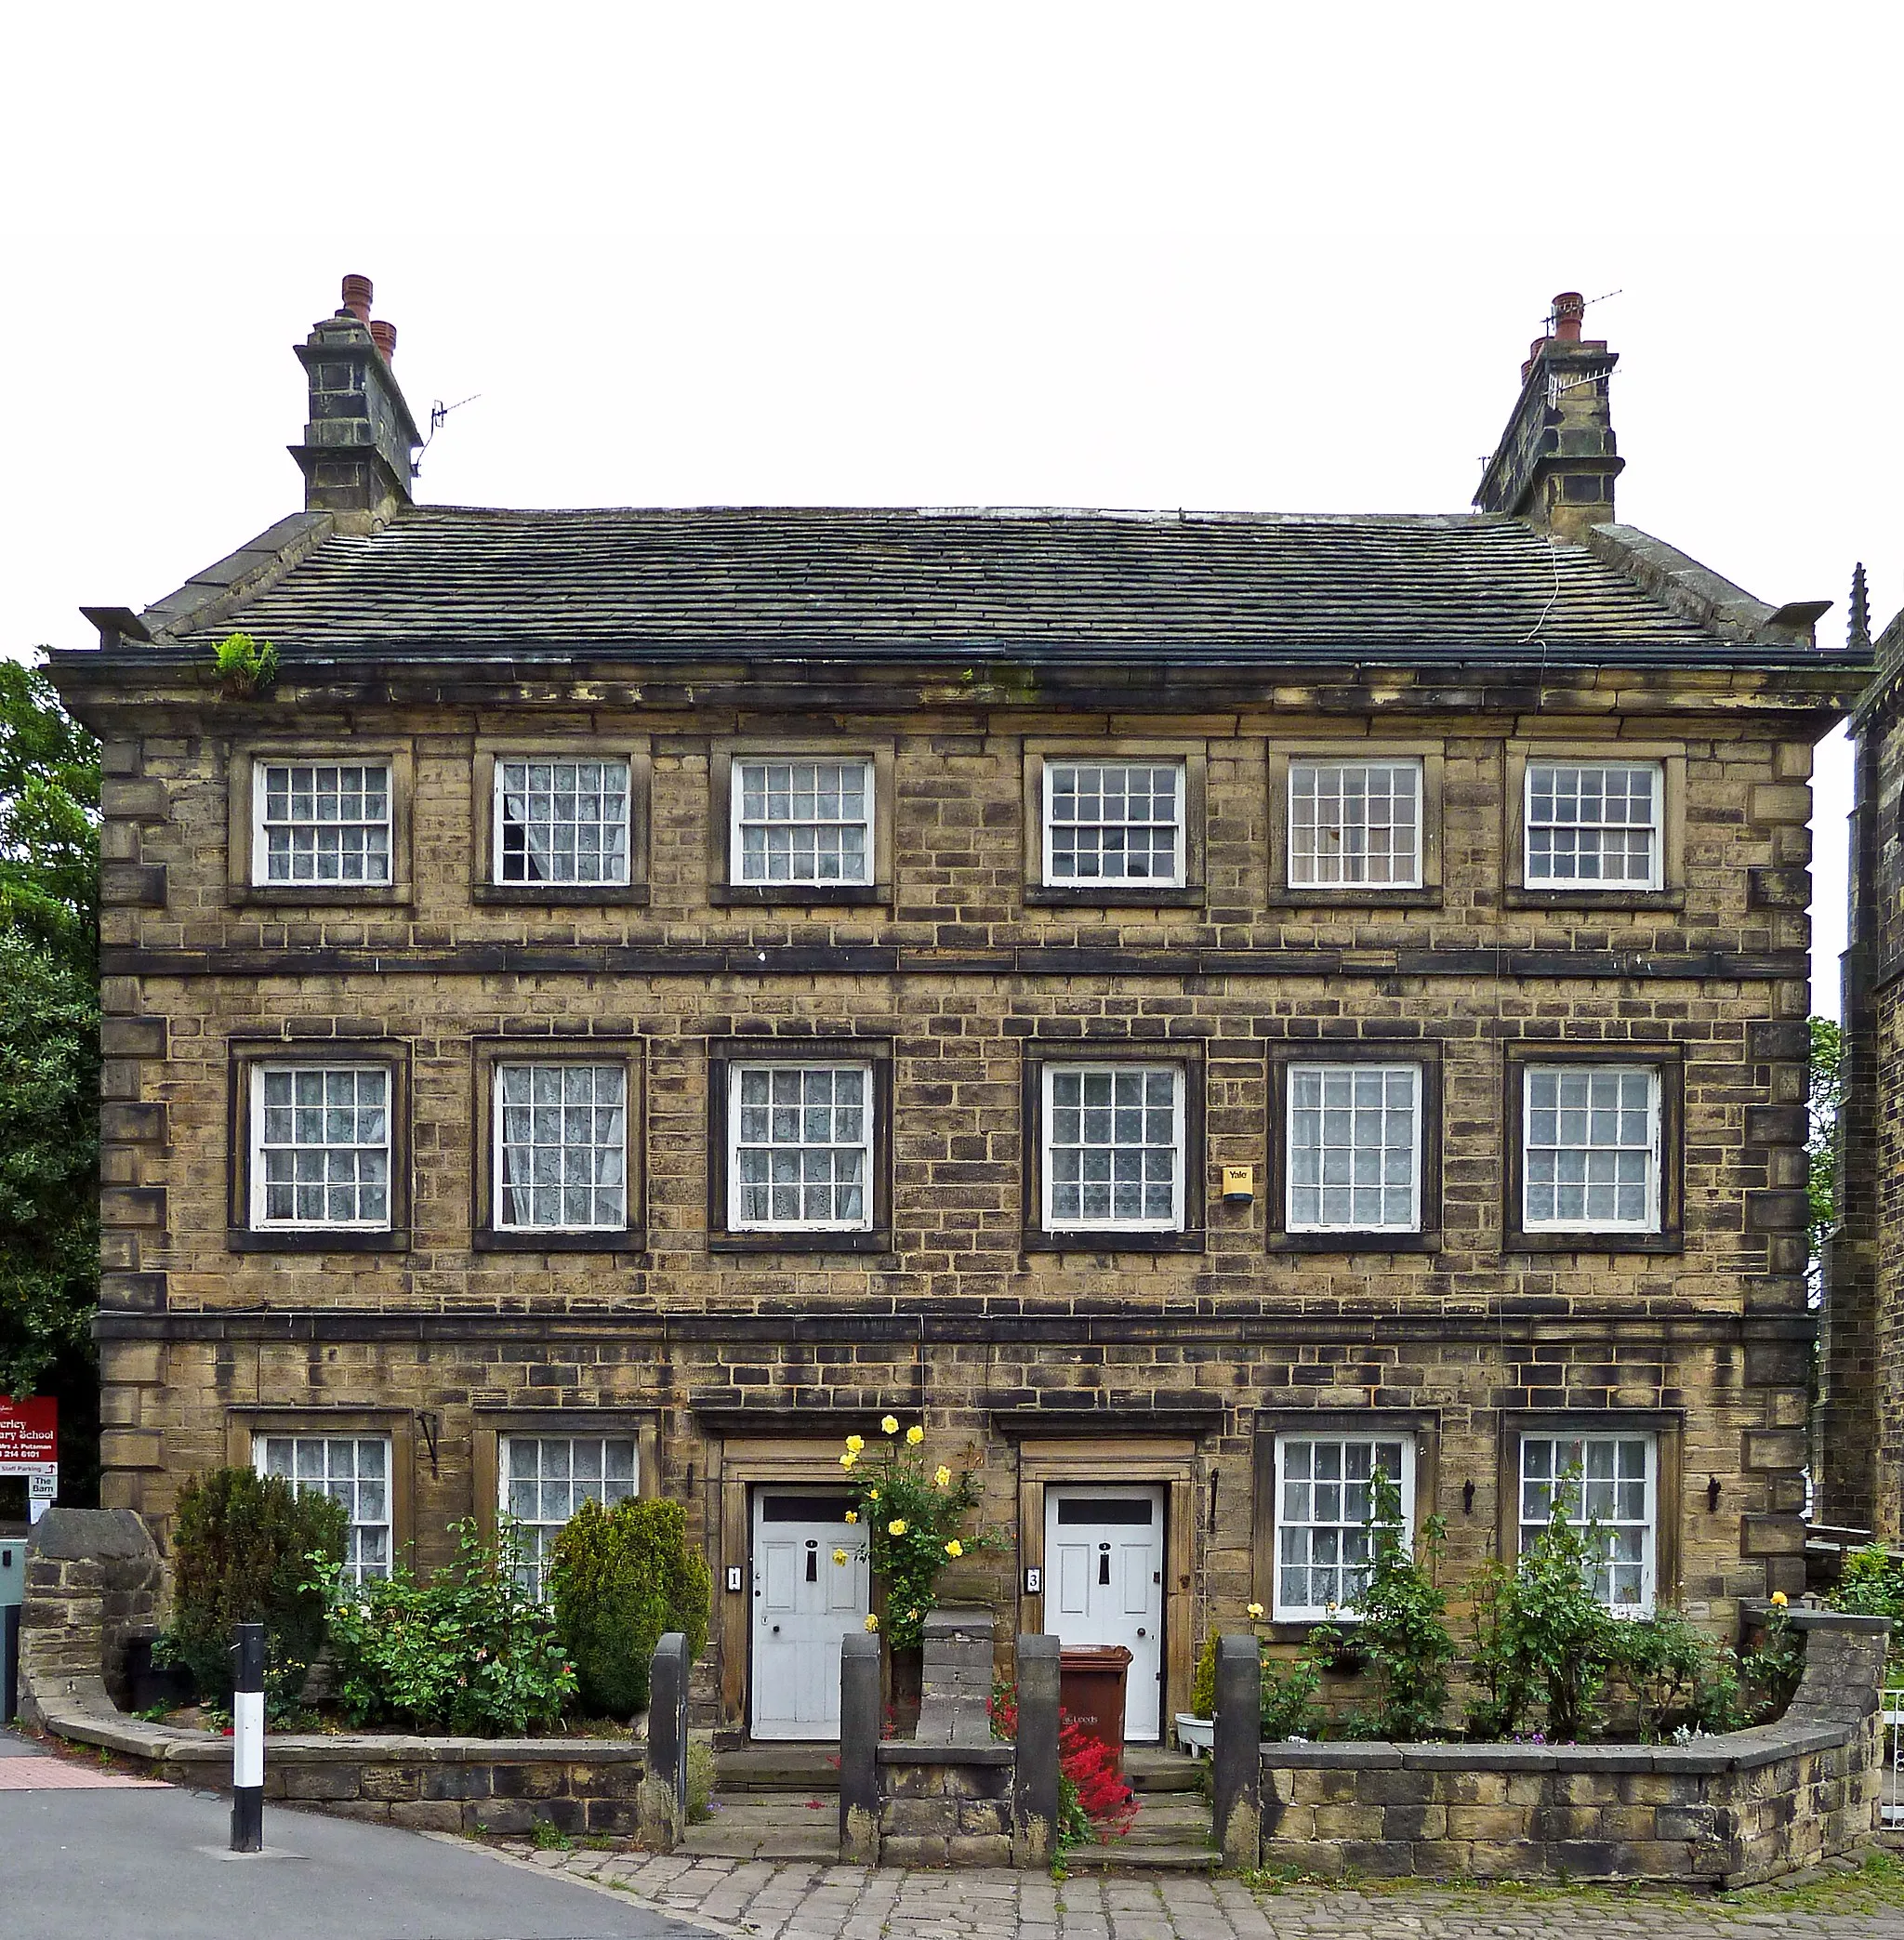 Photo showing: Grade 2*. Large pair of semi-detached houses. Mid C18 with rear service block added c1800. Well-coursed dressed stone to front, harrier-dressed stone to sides and rear, stone slate roof. 3 storeys and attics, double-depth. 6-bay symmetrical facade. Raised chamfered quoins, lst- and 2nd-floor bands, eaves cornice. Central 2 bays have identical doorways with architraves, pulvinated friezes and cornices. All windows have raised square surrounds and retain 16-pane sashes except those to second floor which has smaller windows with 20-pane sashes. Coped gables with kneelers and end stacks. Rear plainer with recessed flat-faced mullion windows. Left-hand return has similar windows and taking-in door (blocked) to each of the upper floors. Right-hand return, facing into the churchyard and therefore open to public view, has 4 ground-floor windows as front (some blocked) and some to upper-floor outer bays.
Interior: stair-halls with relatively late staircases separated from each other by a thick stone wall, each hall partitioned from the front parlours by another stone wall. Rear rooms have 2 spine beams and corner fireplaces.
A house of fine stone detail prominently sited next to the church and unusual in being an early example of semi-detached housing.

www.britishlistedbuildings.co.uk/en-423114-church-house-1...